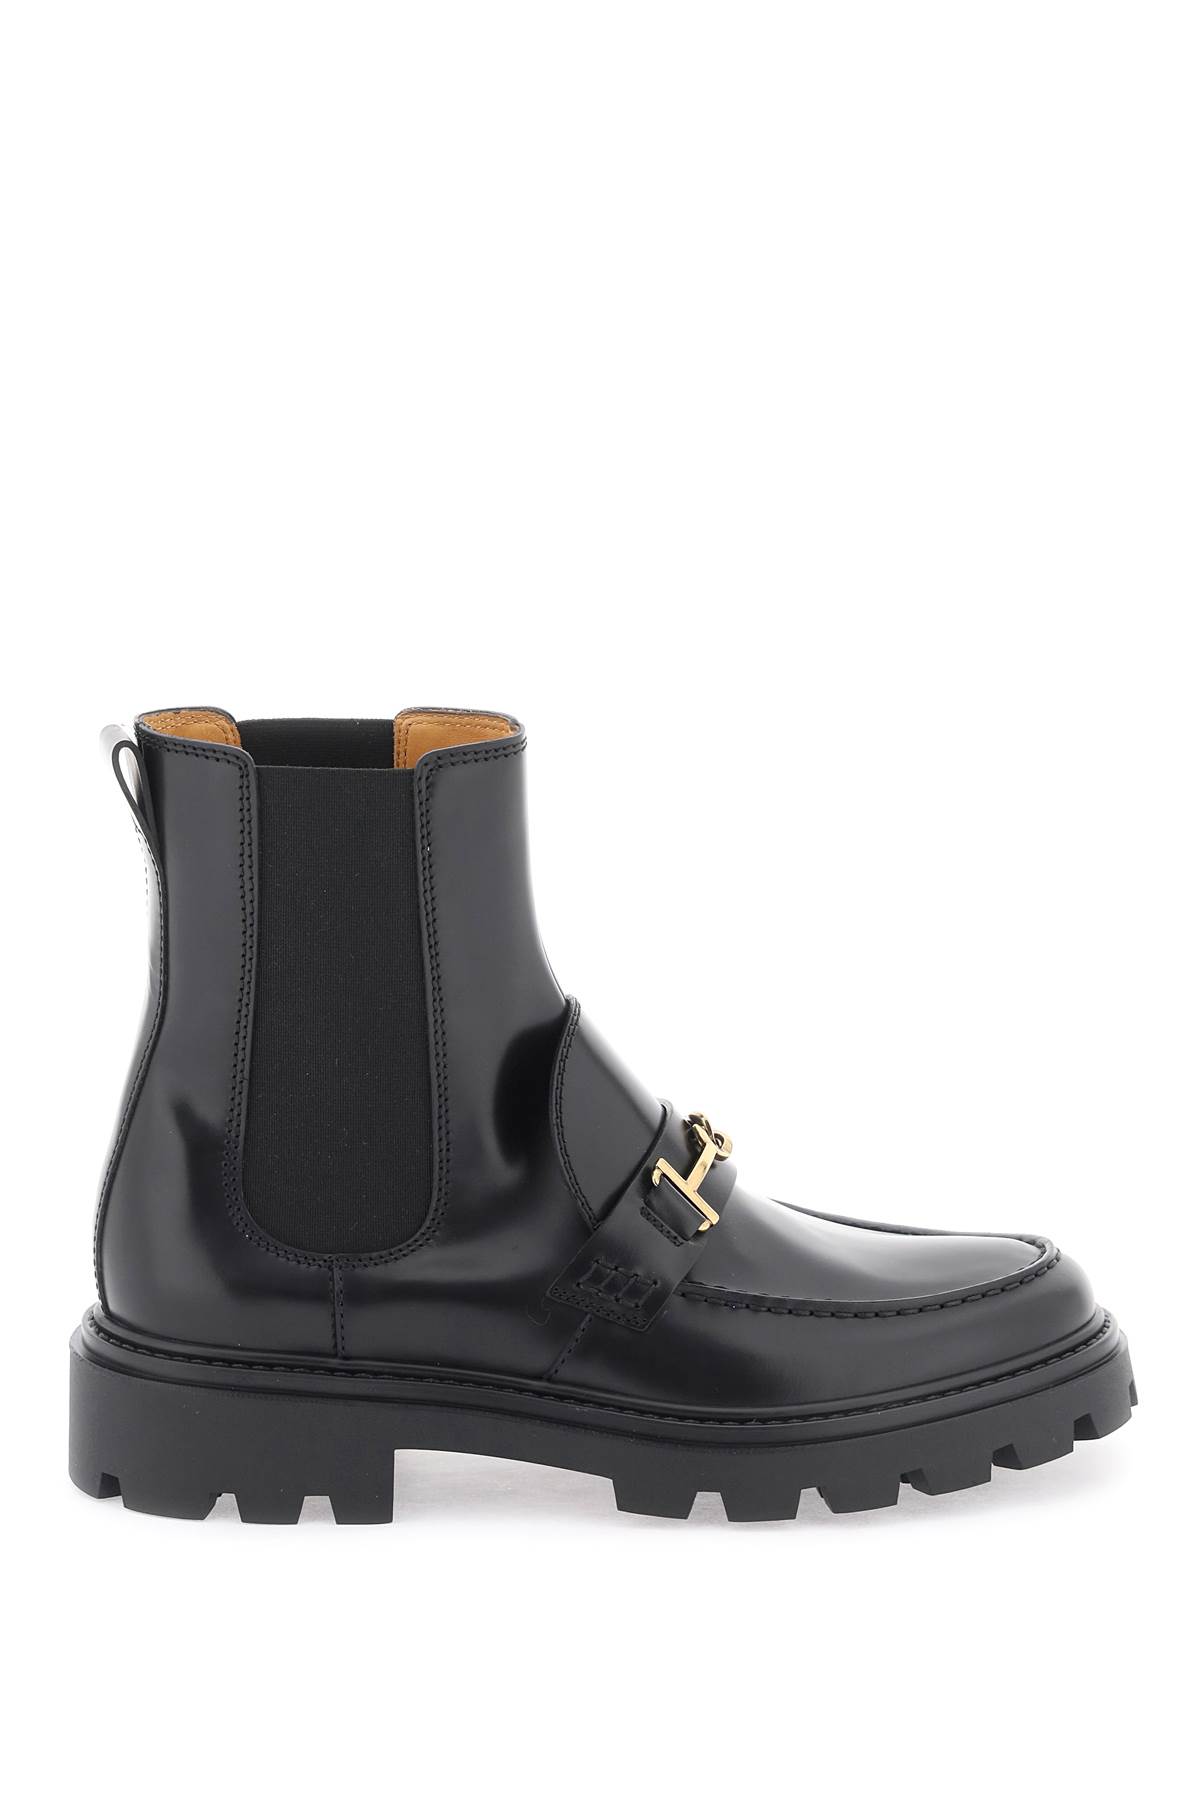 TOD'S LEATHER BOOTS